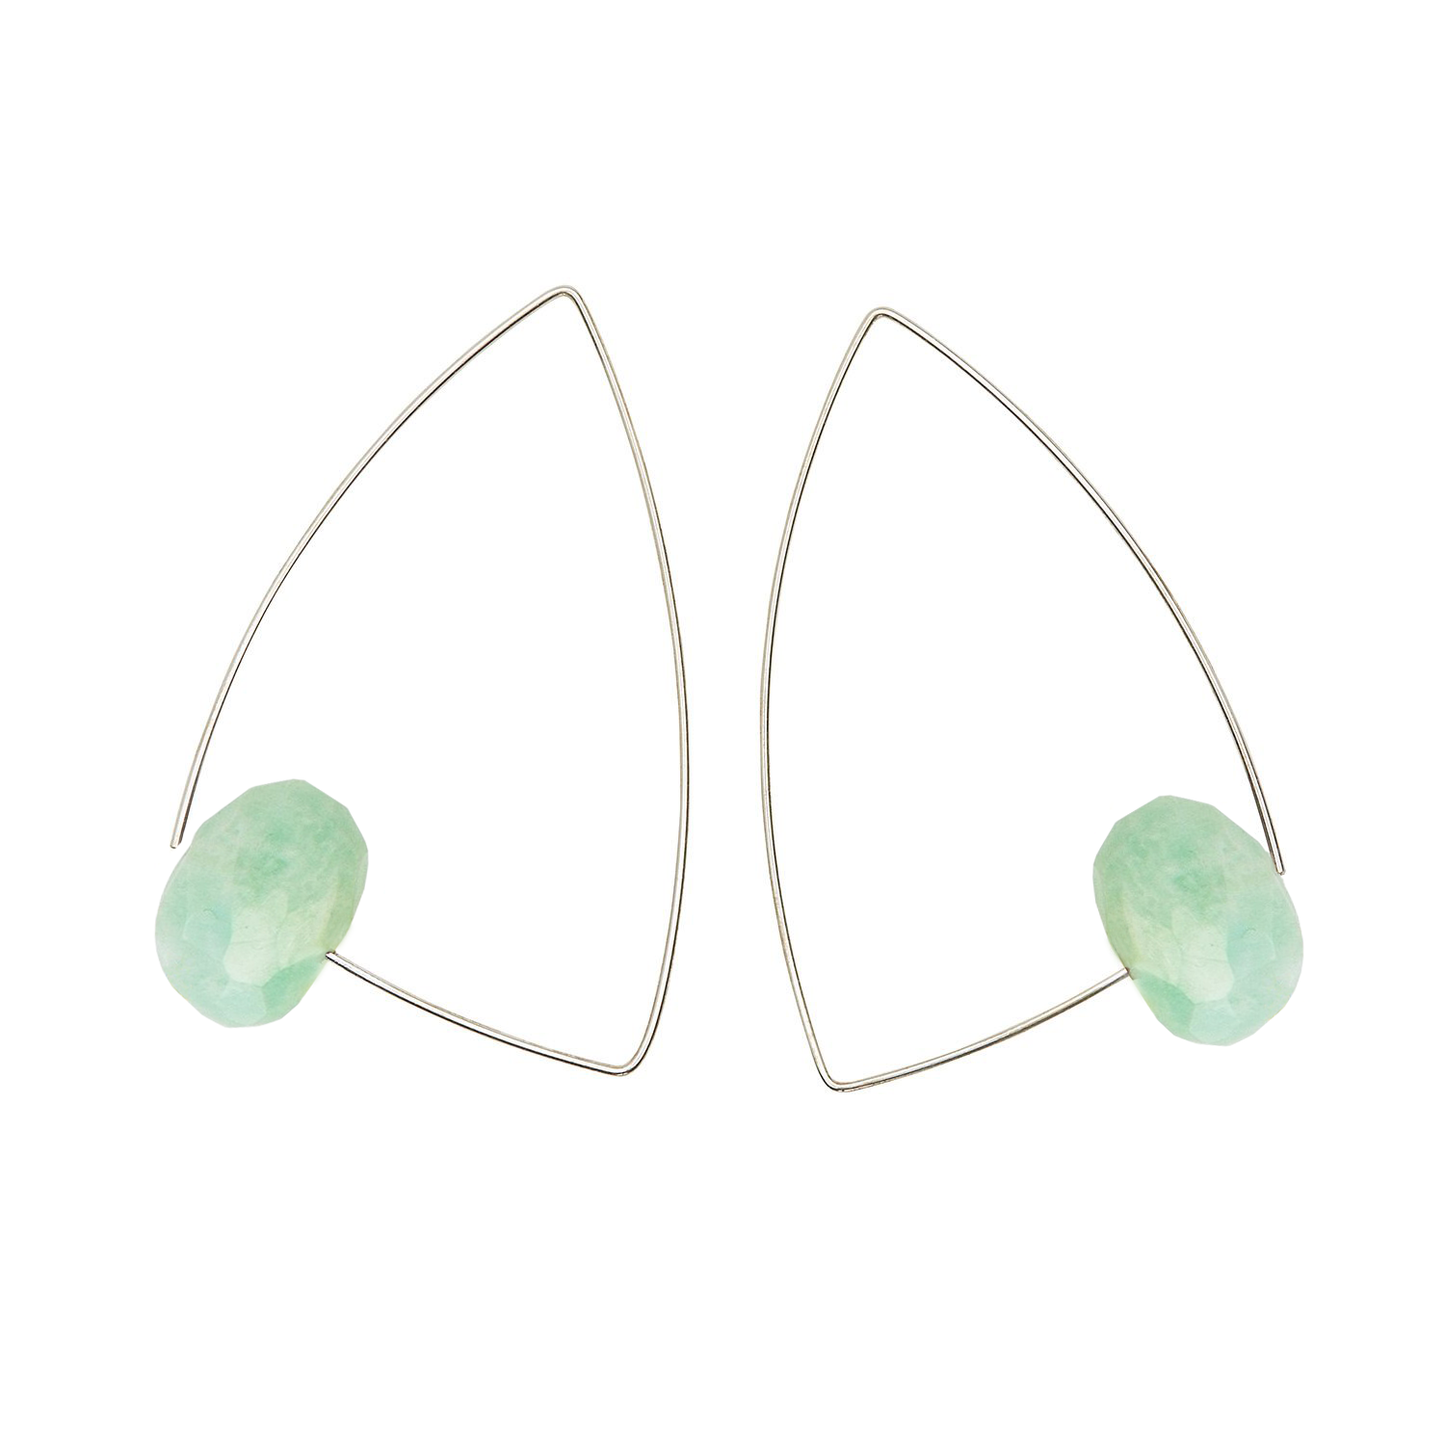 Large Triangle Earrings with hand-cut precious Gemstones